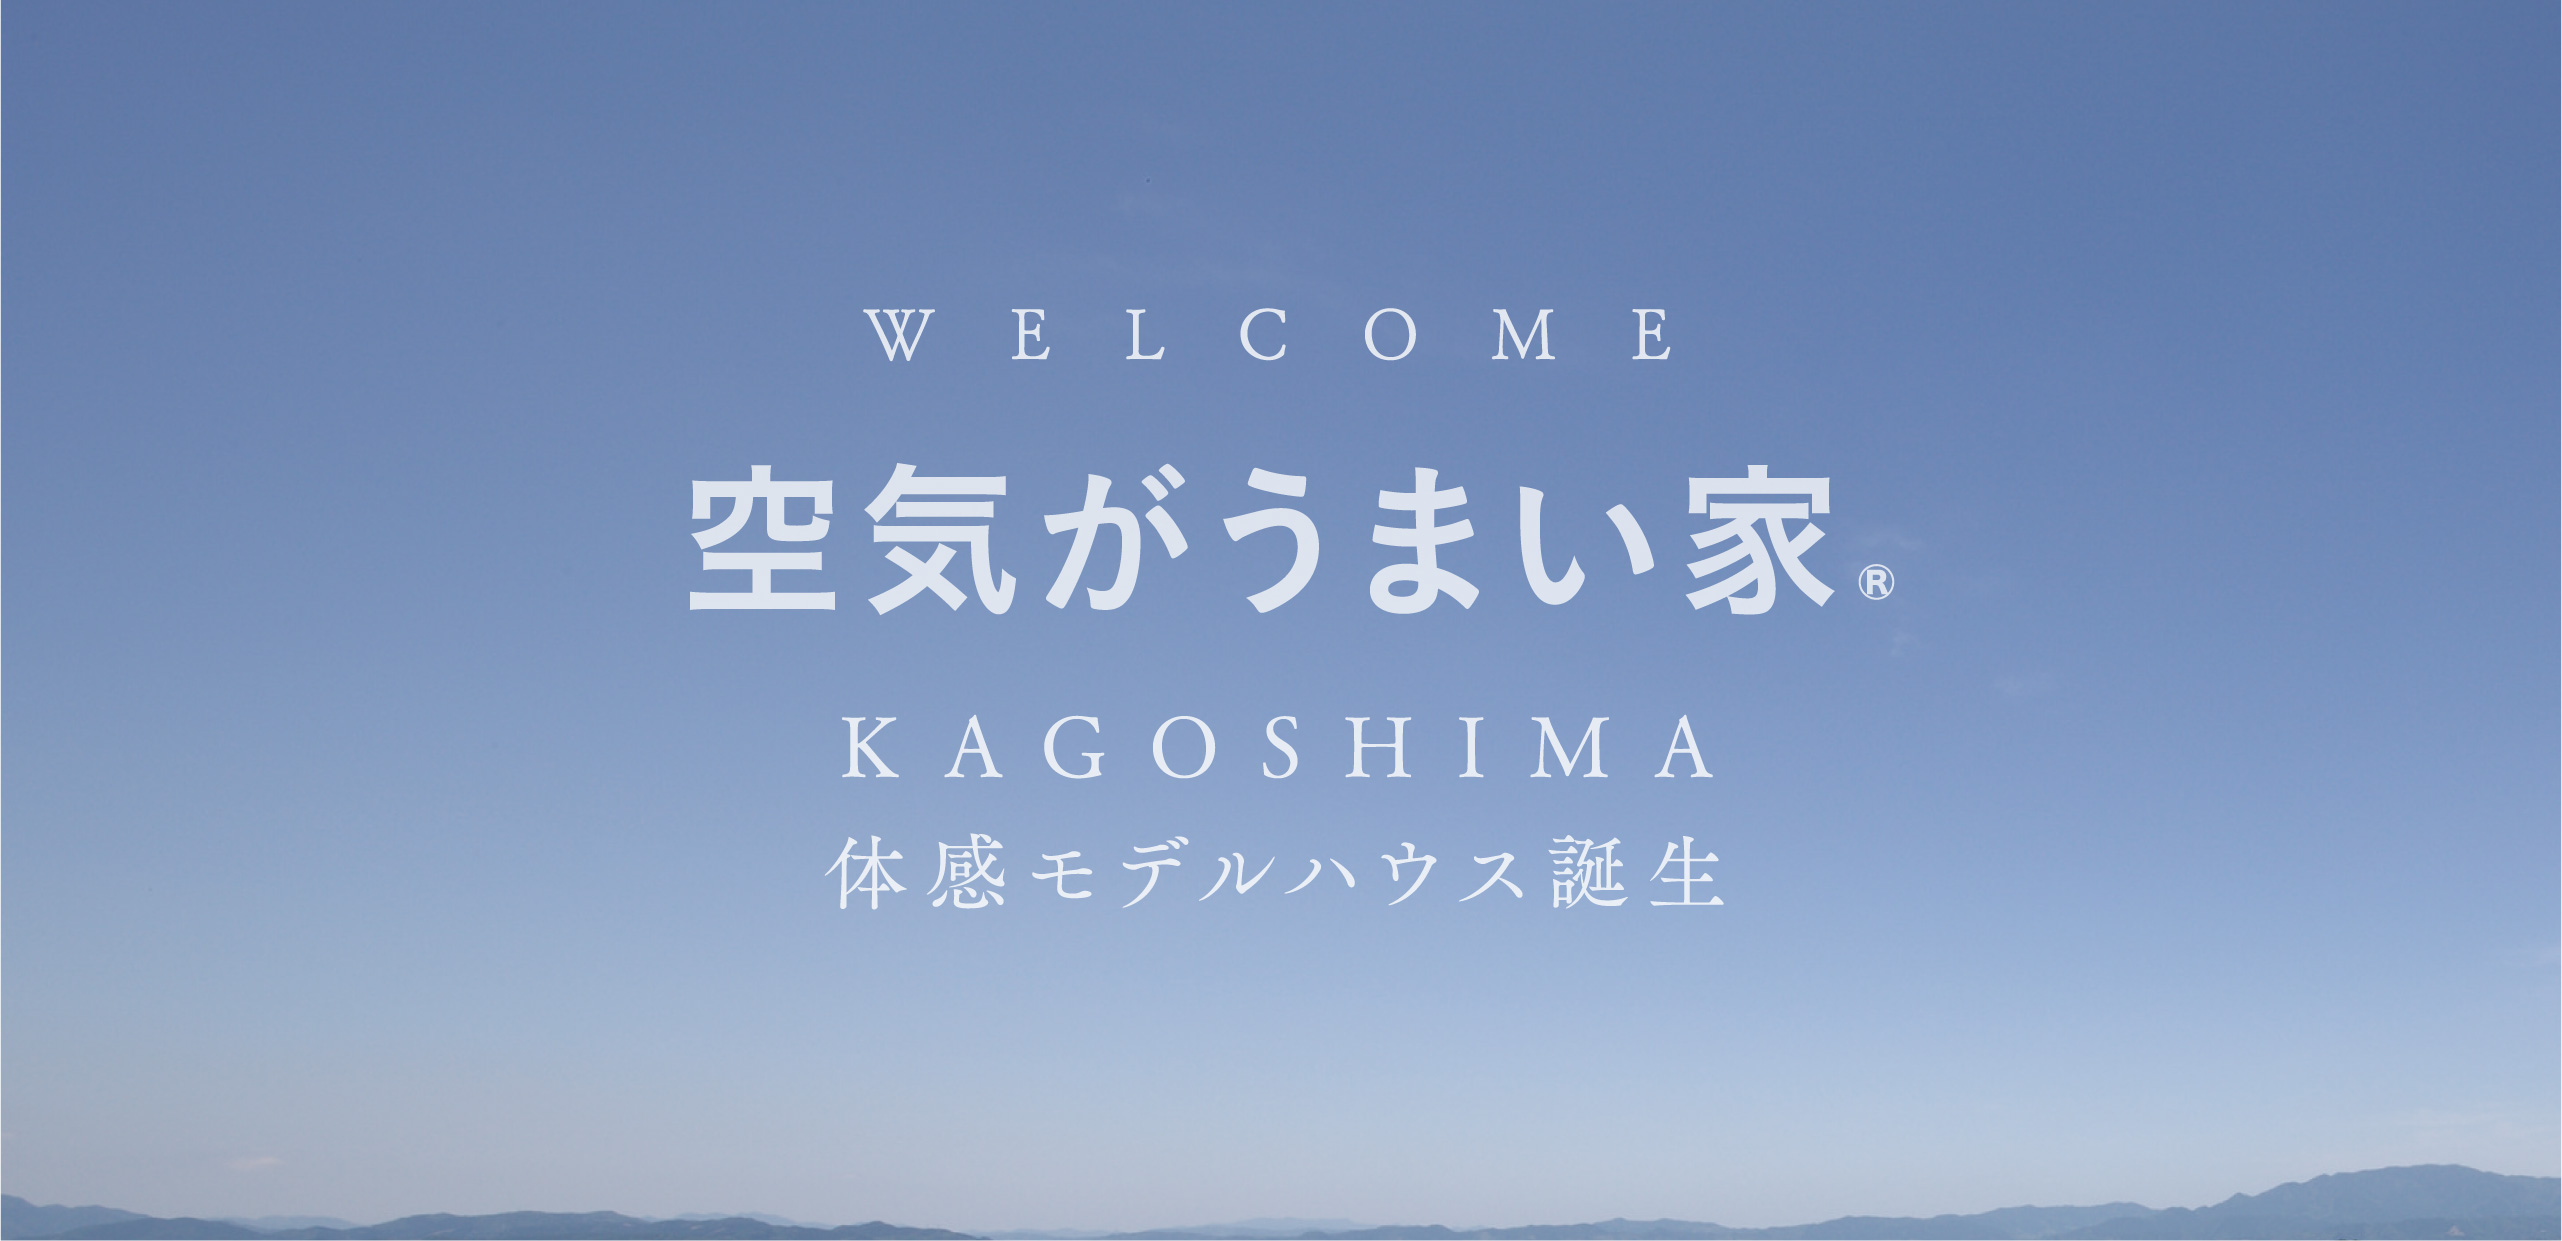 WELCOME<br>空気がうまい家®<br>KAGOSHIMA<br>体感モデルハウス